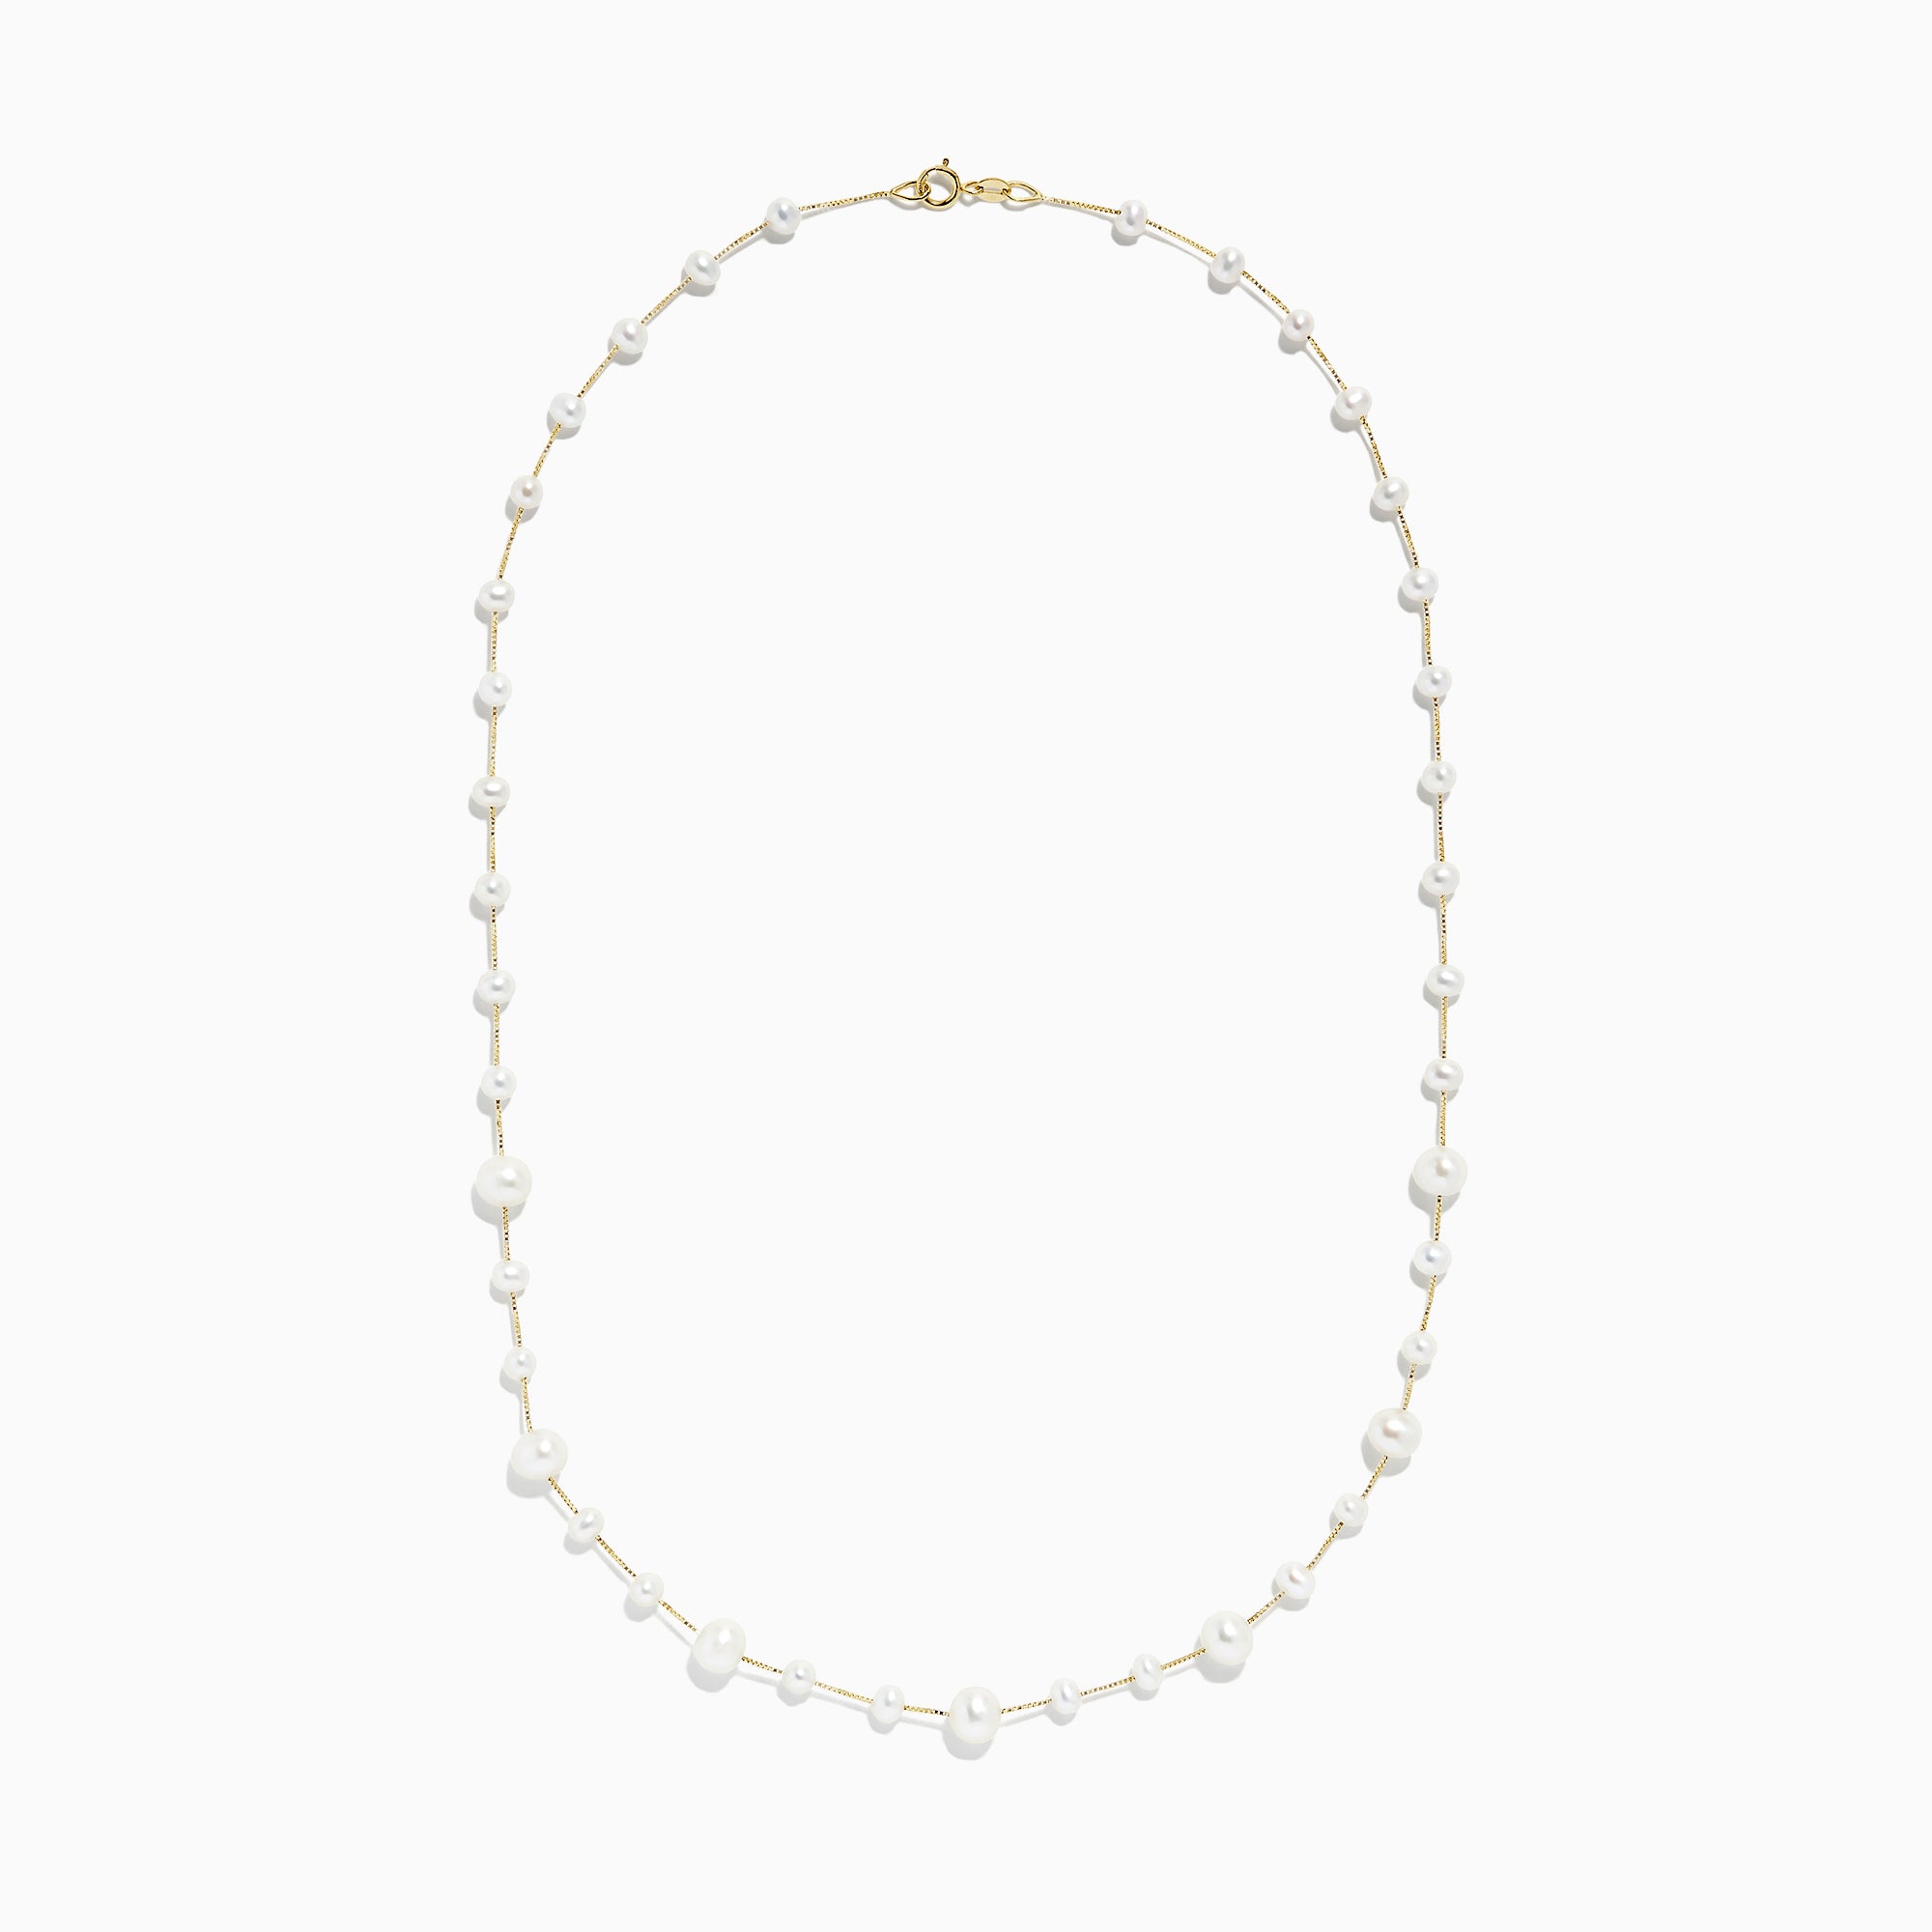 Effy 14K Yellow Gold Cultured Fresh Water Pearl Necklace